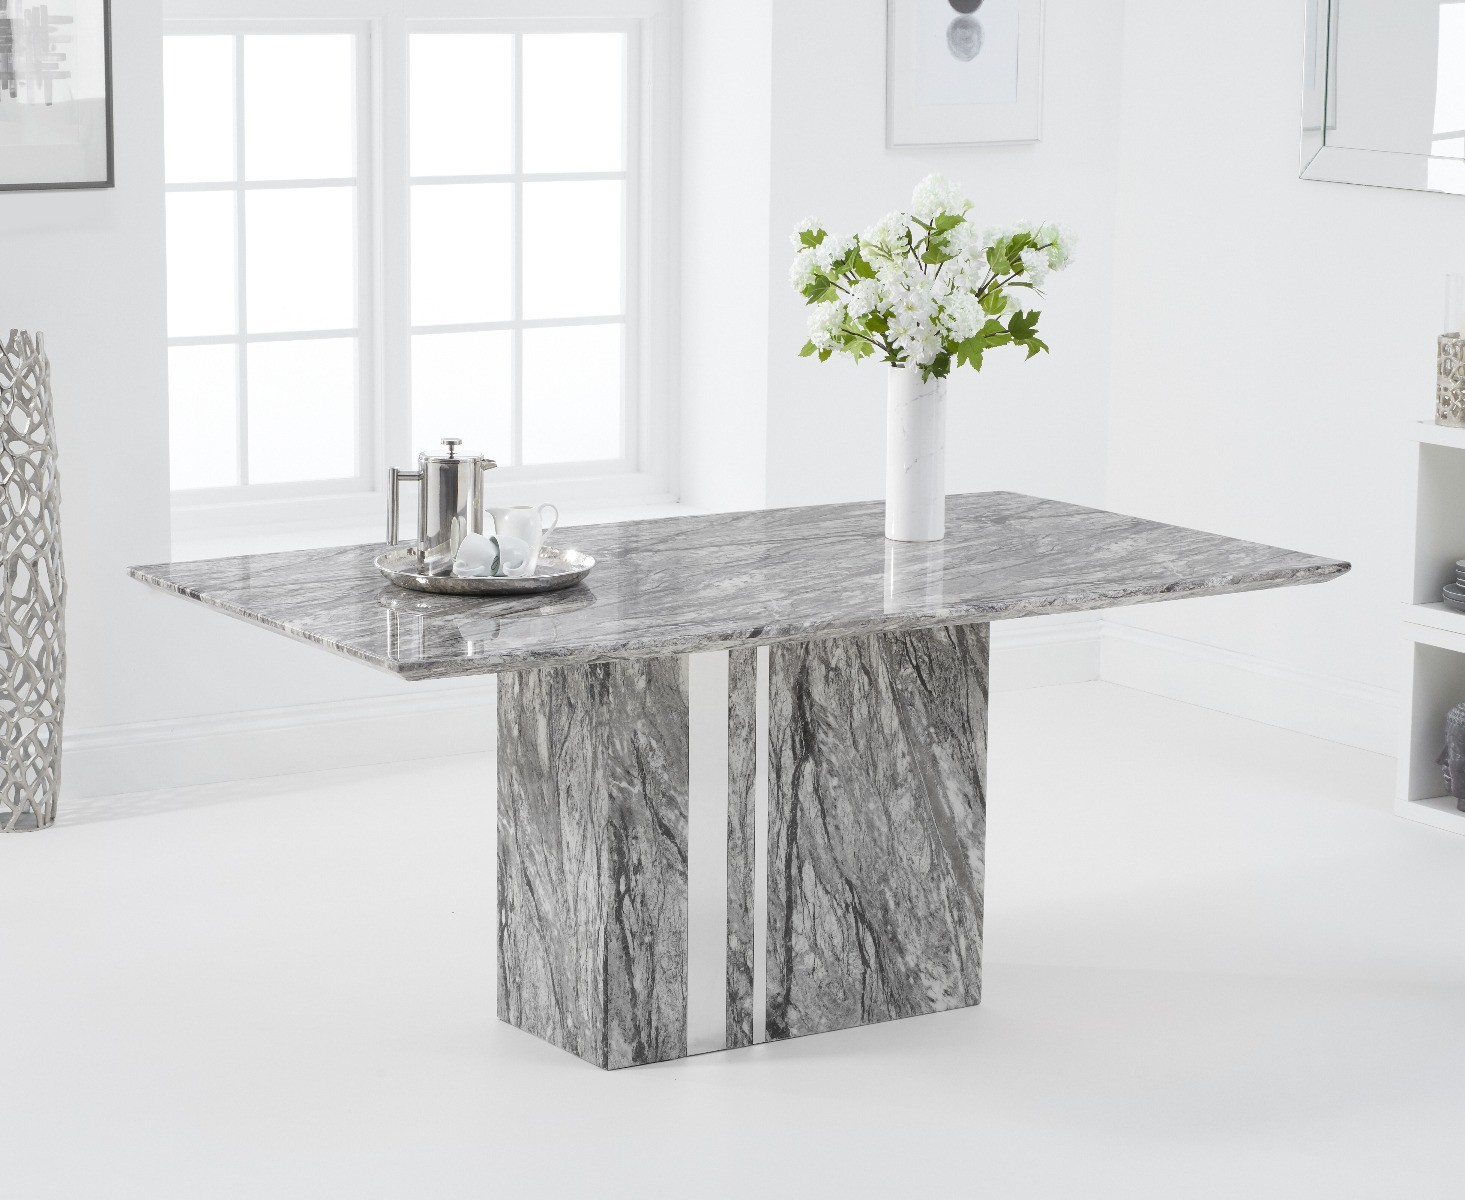 Photo 2 of Alicia 180cm grey marble dining table with 8 black austin chairs